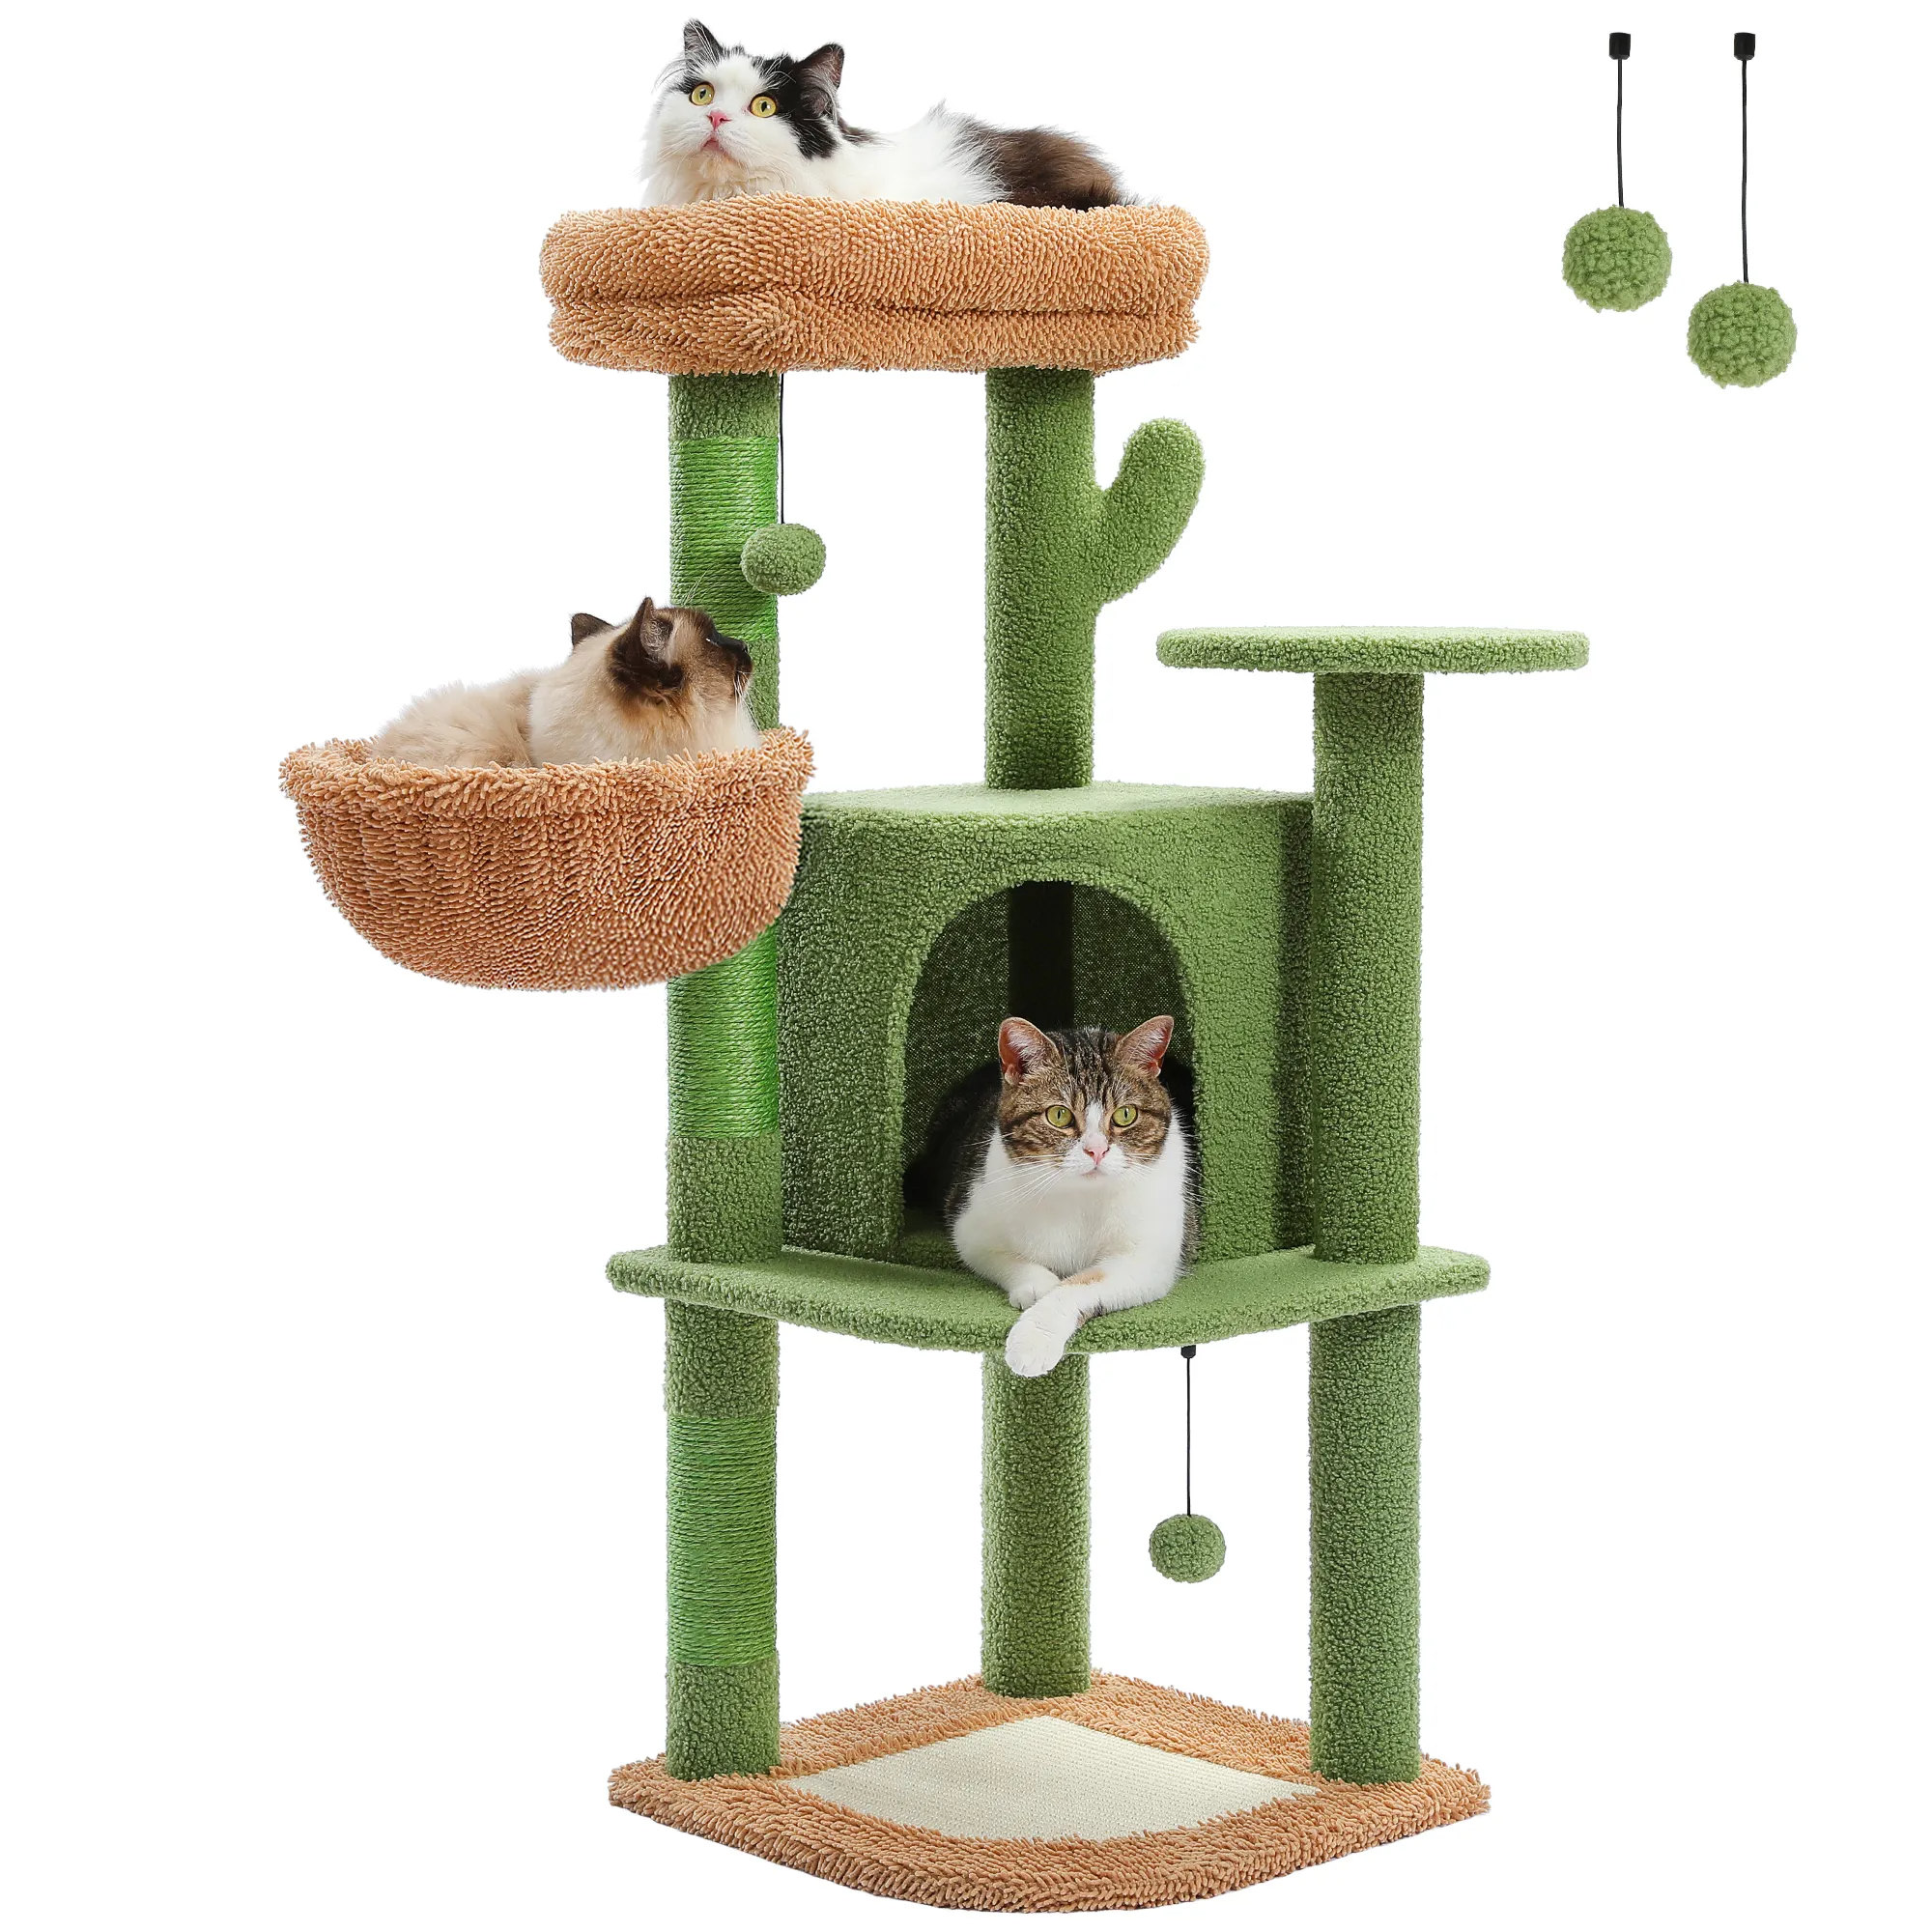 H107/83CM 2 Size Cactus Cat Tree for Indoor Cat Tower Toy Large Top Perch Sisal Covered Scratching Posts& Pad Hummock Big Condo